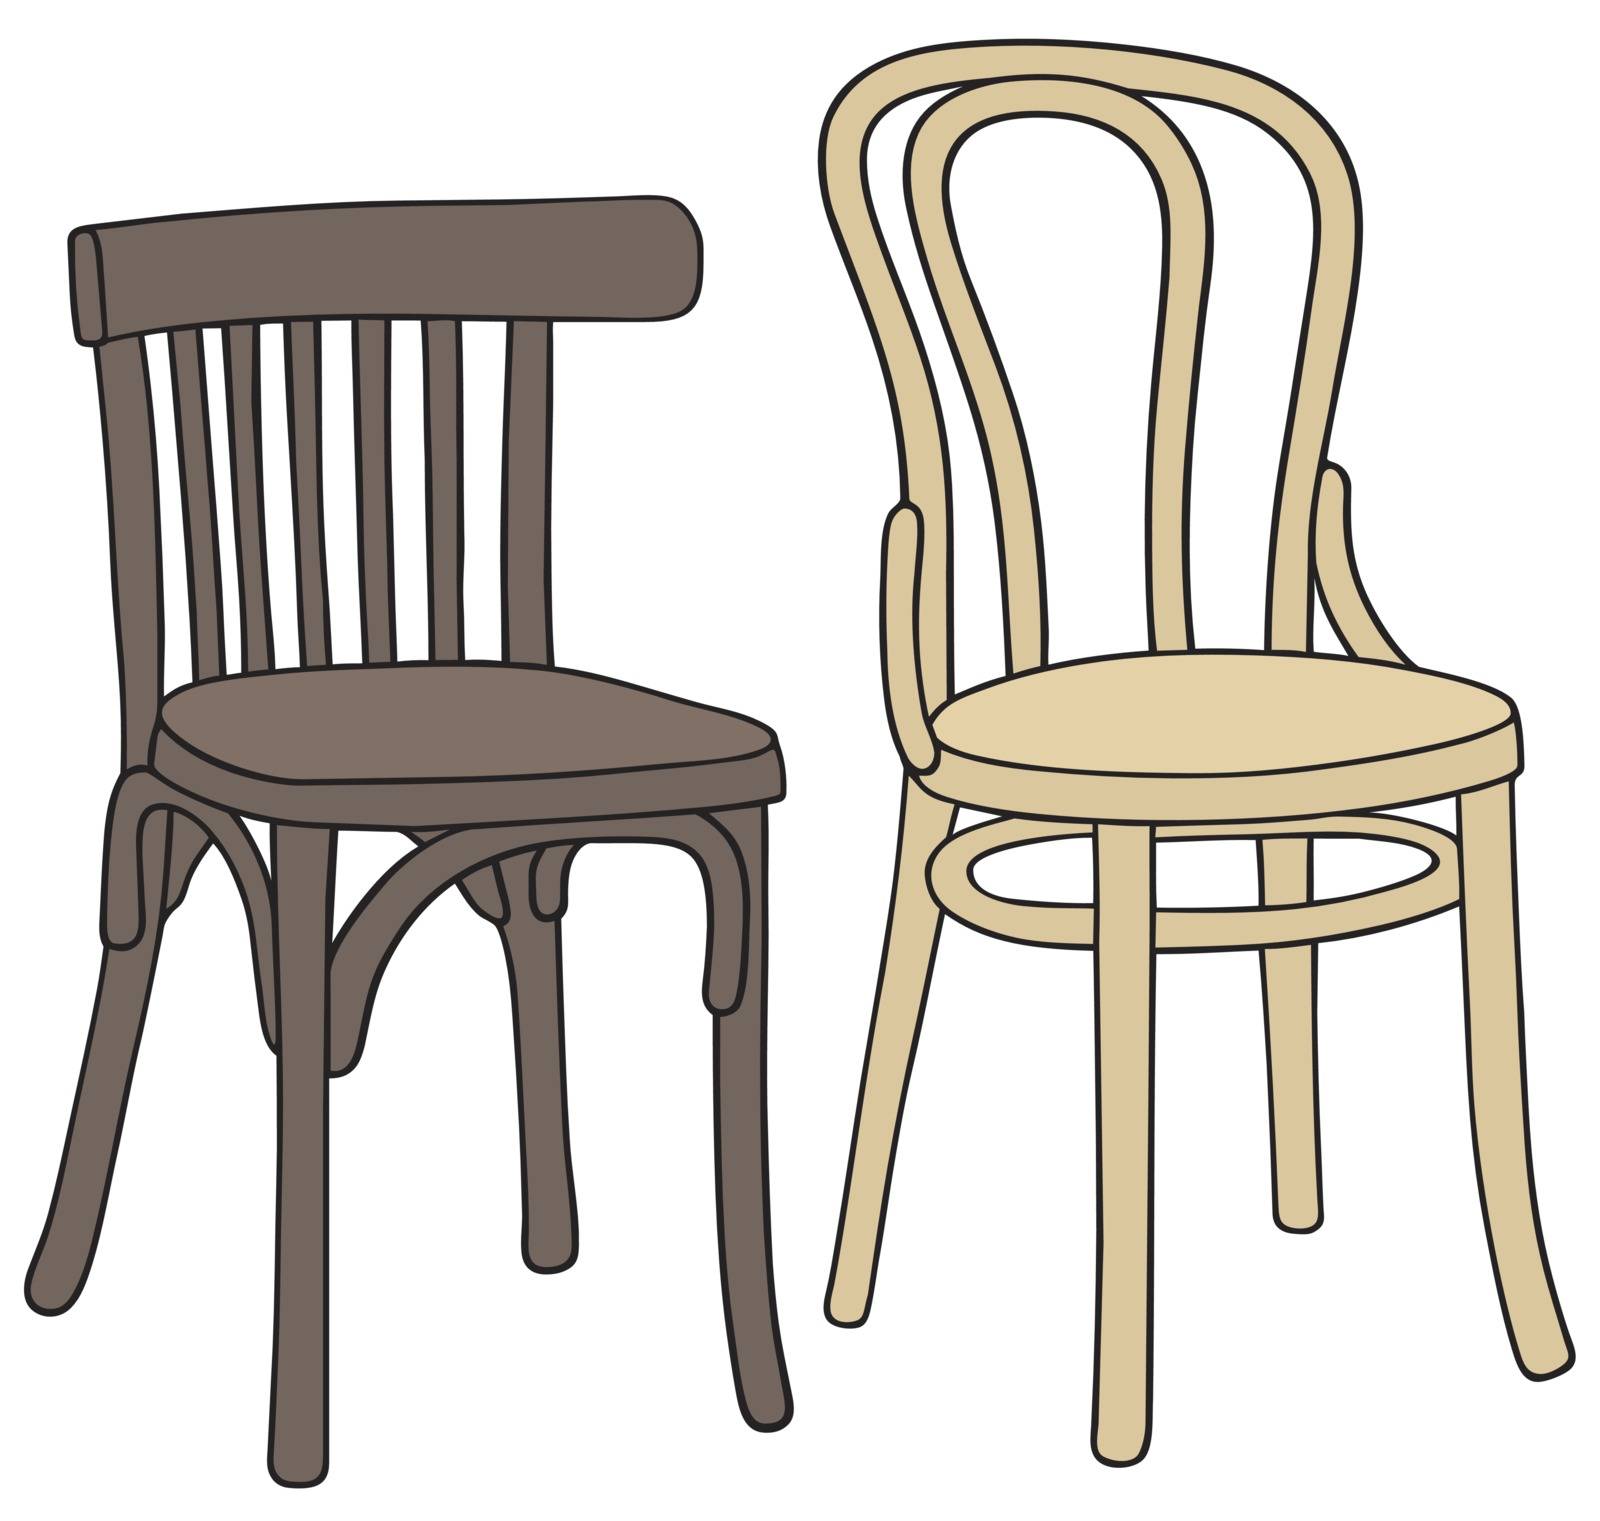 Classic wooden chairs by vostal